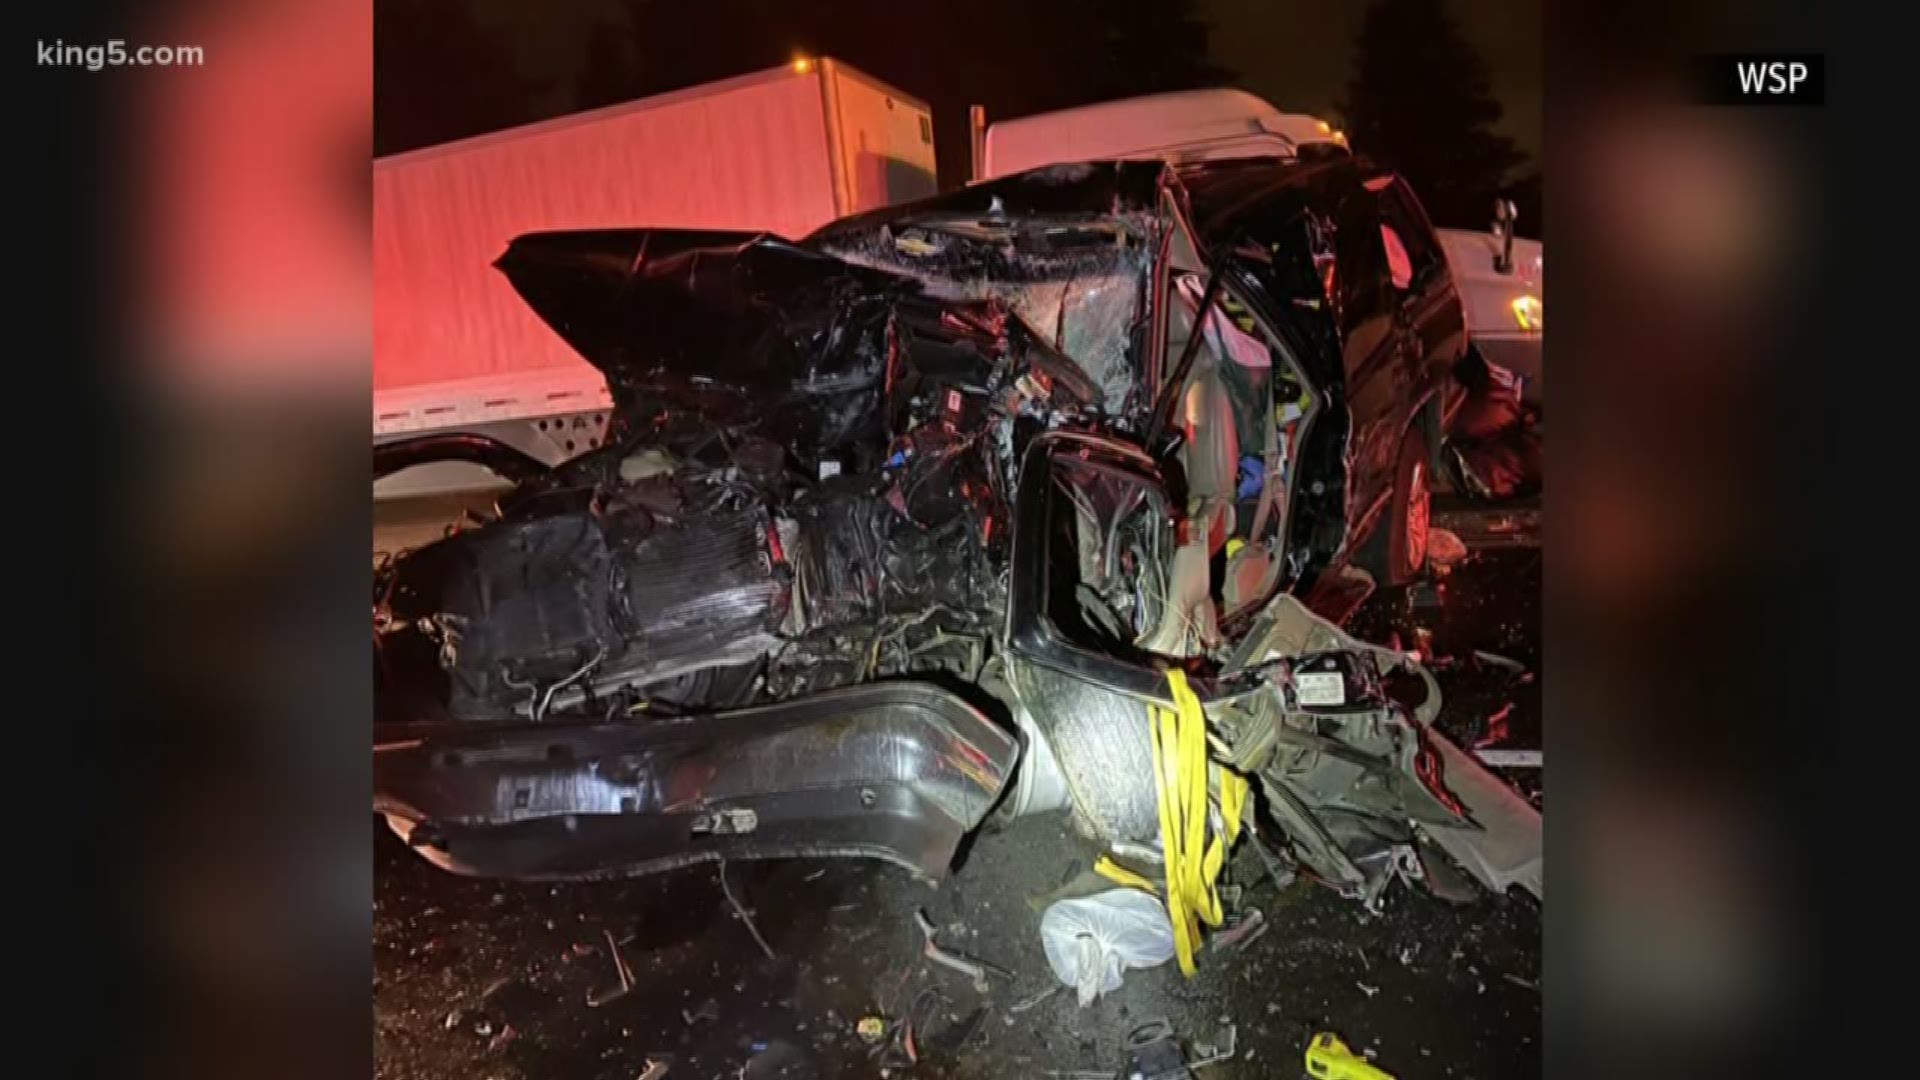 I-5 in Lakewood reopened after a semi truck fire, police pursuit, collision with several emergency vehicles, and injuries to two people and a dog.